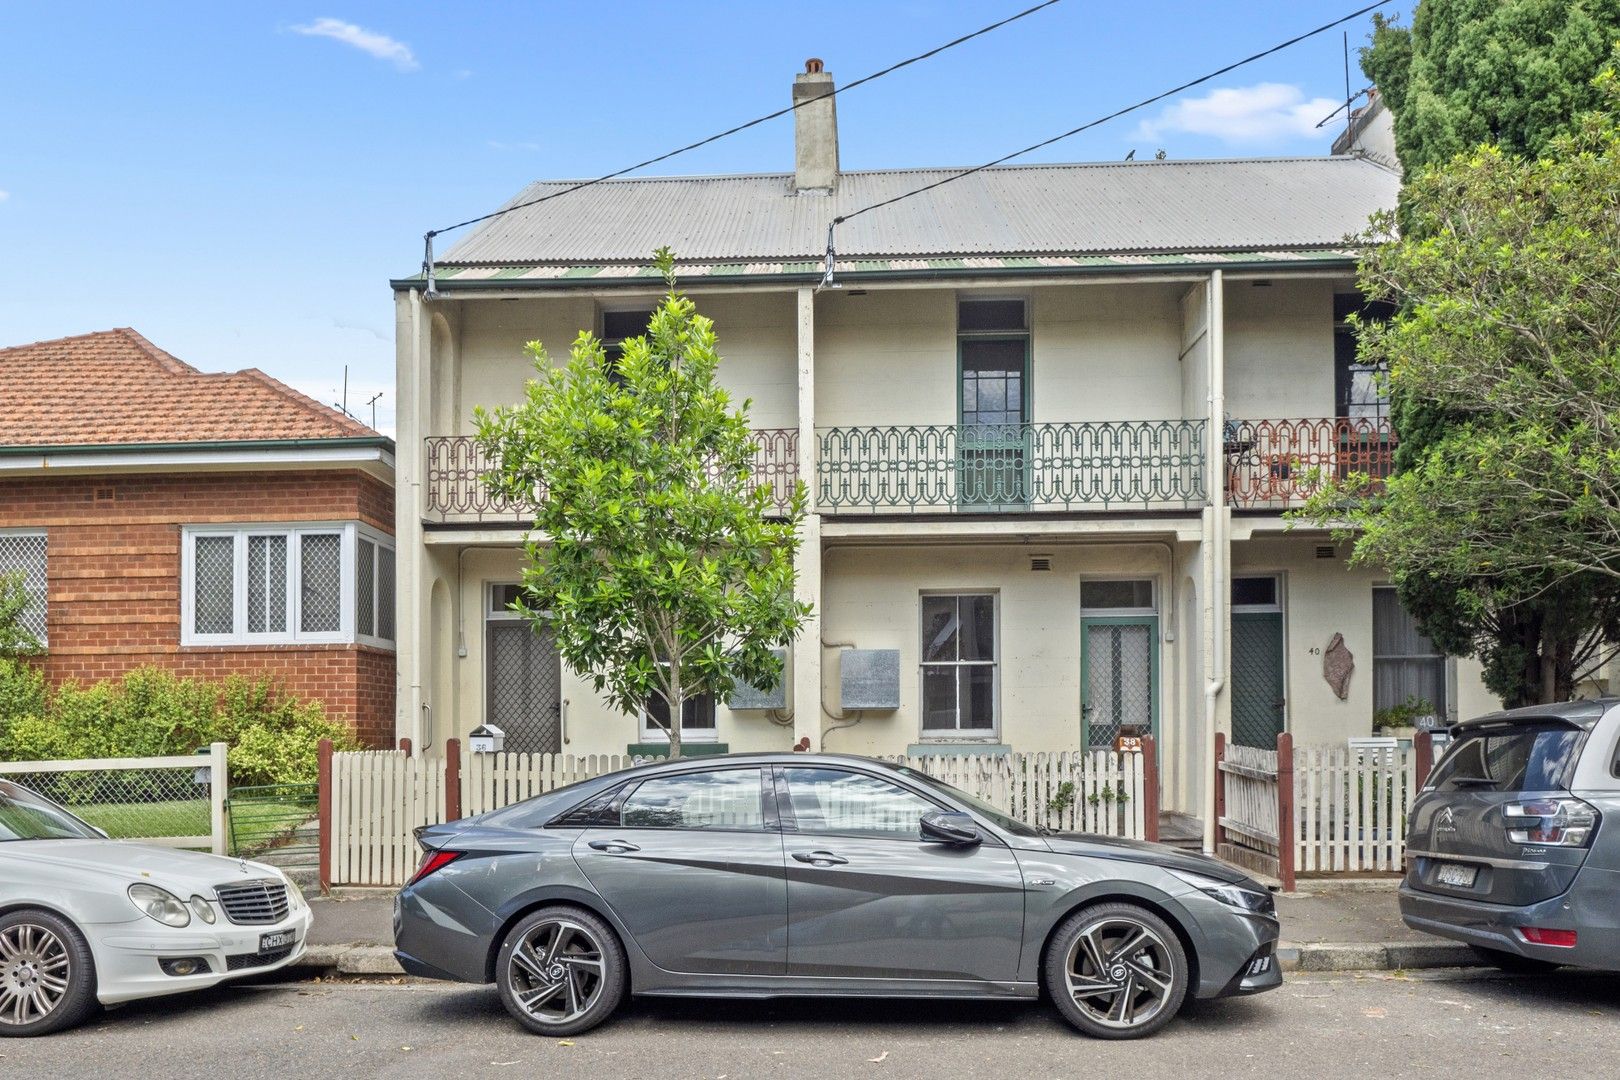 4 bedrooms House in 36 & 38 Campbell Street GLEBE NSW, 2037